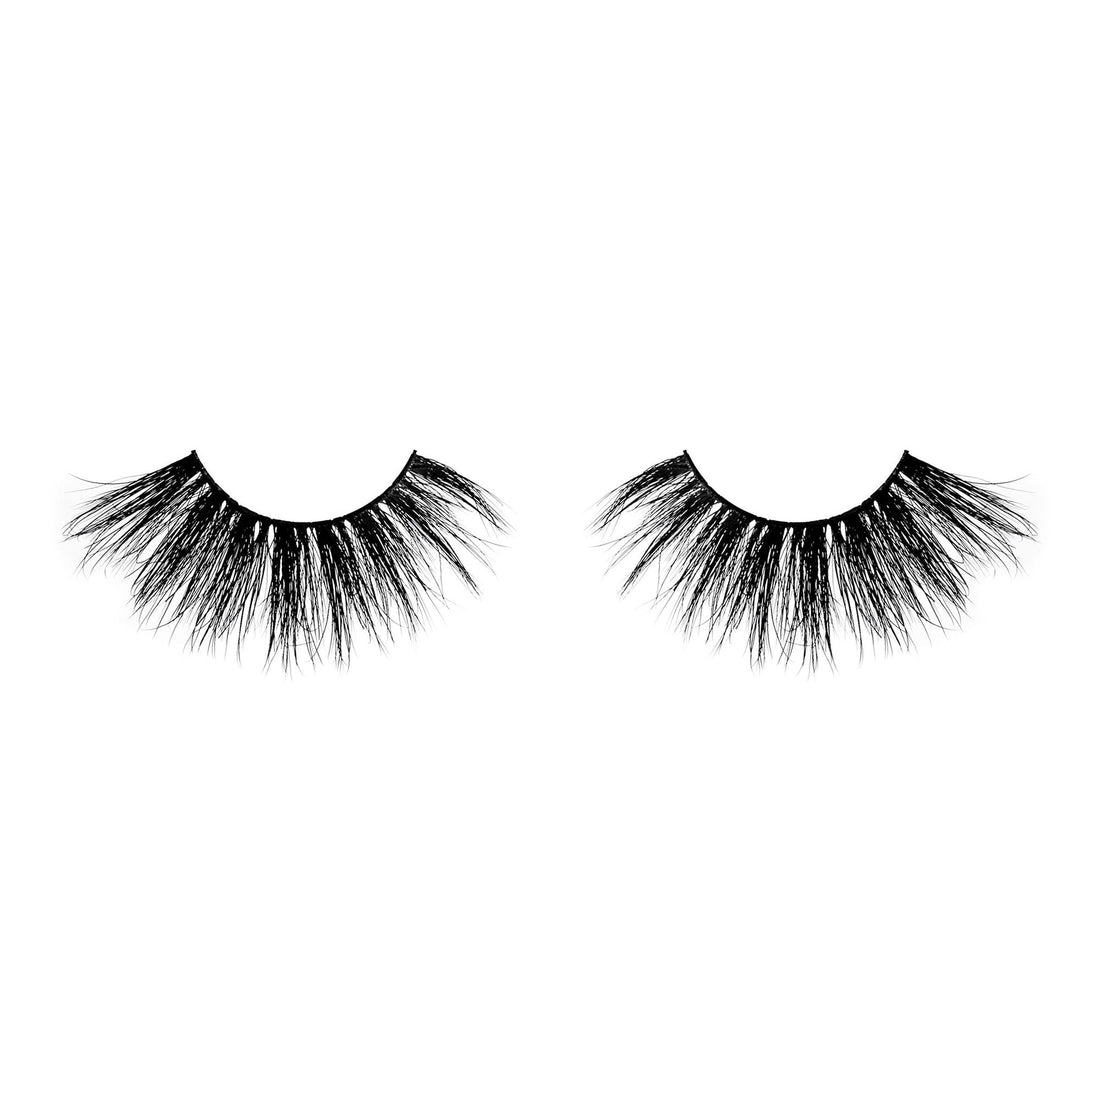 Glamour Us_Beauty Creations_Lashes_BAD HABITS 35 MM Faux Mink Lashes__BC-35MMFL-BH